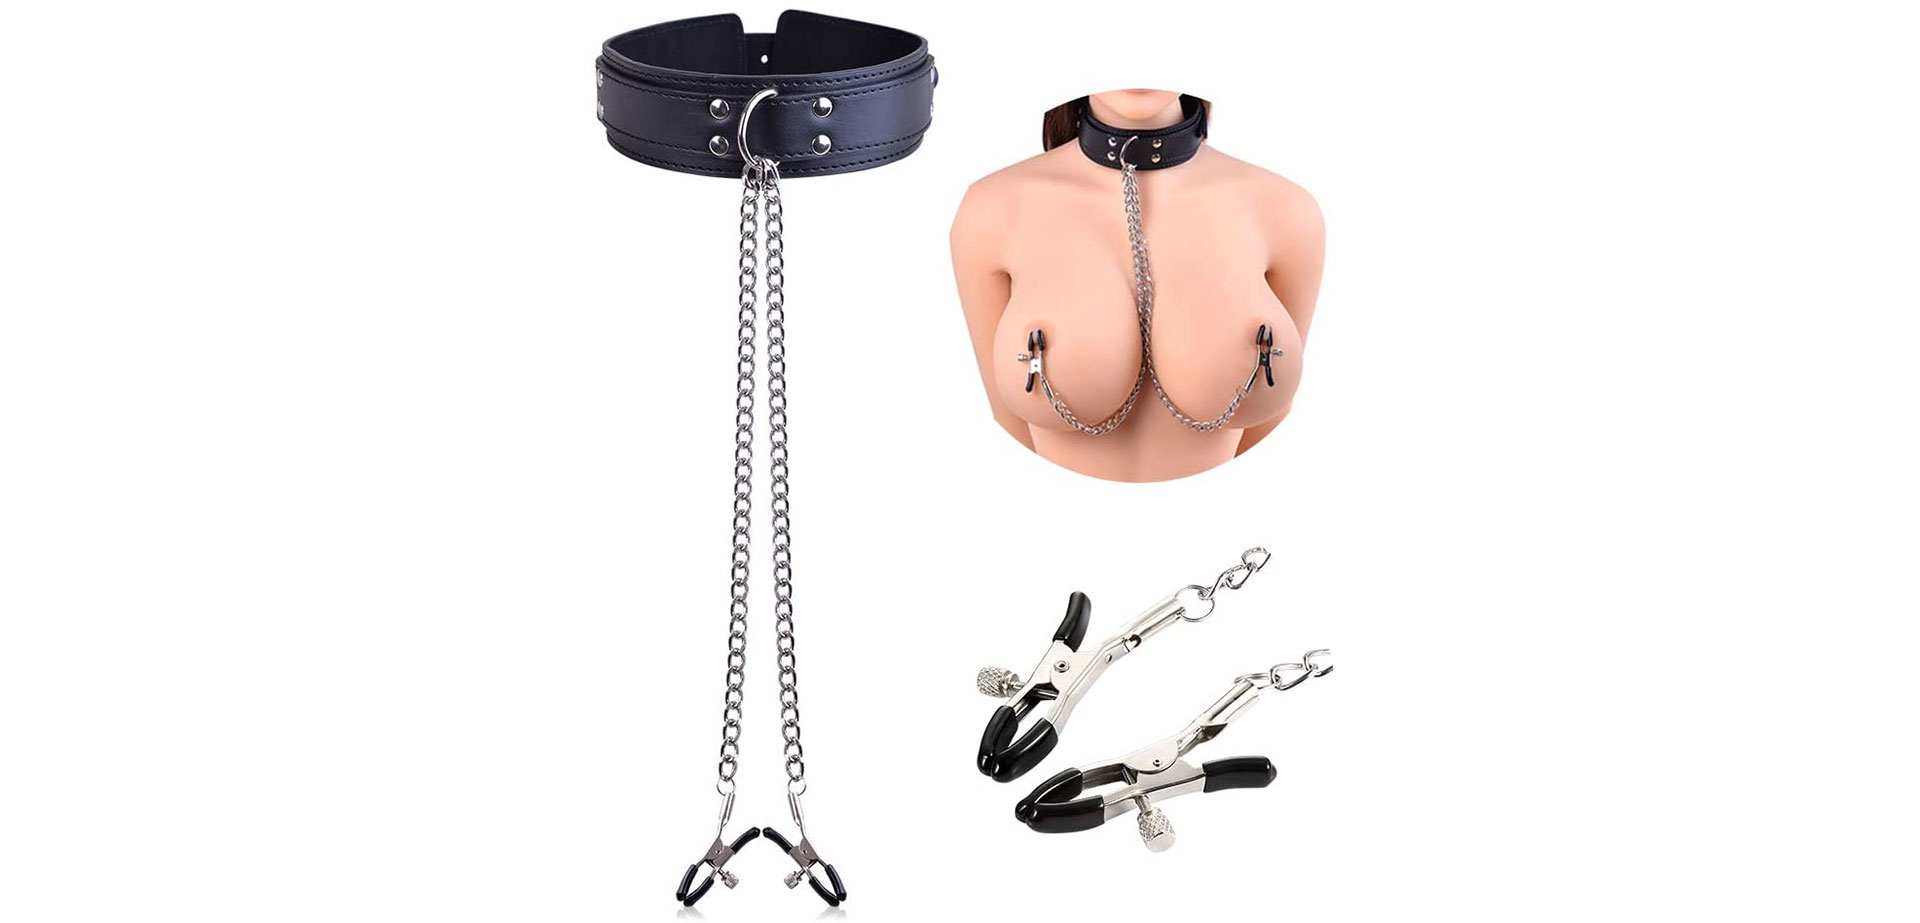 Nipple clamps with neck collar.